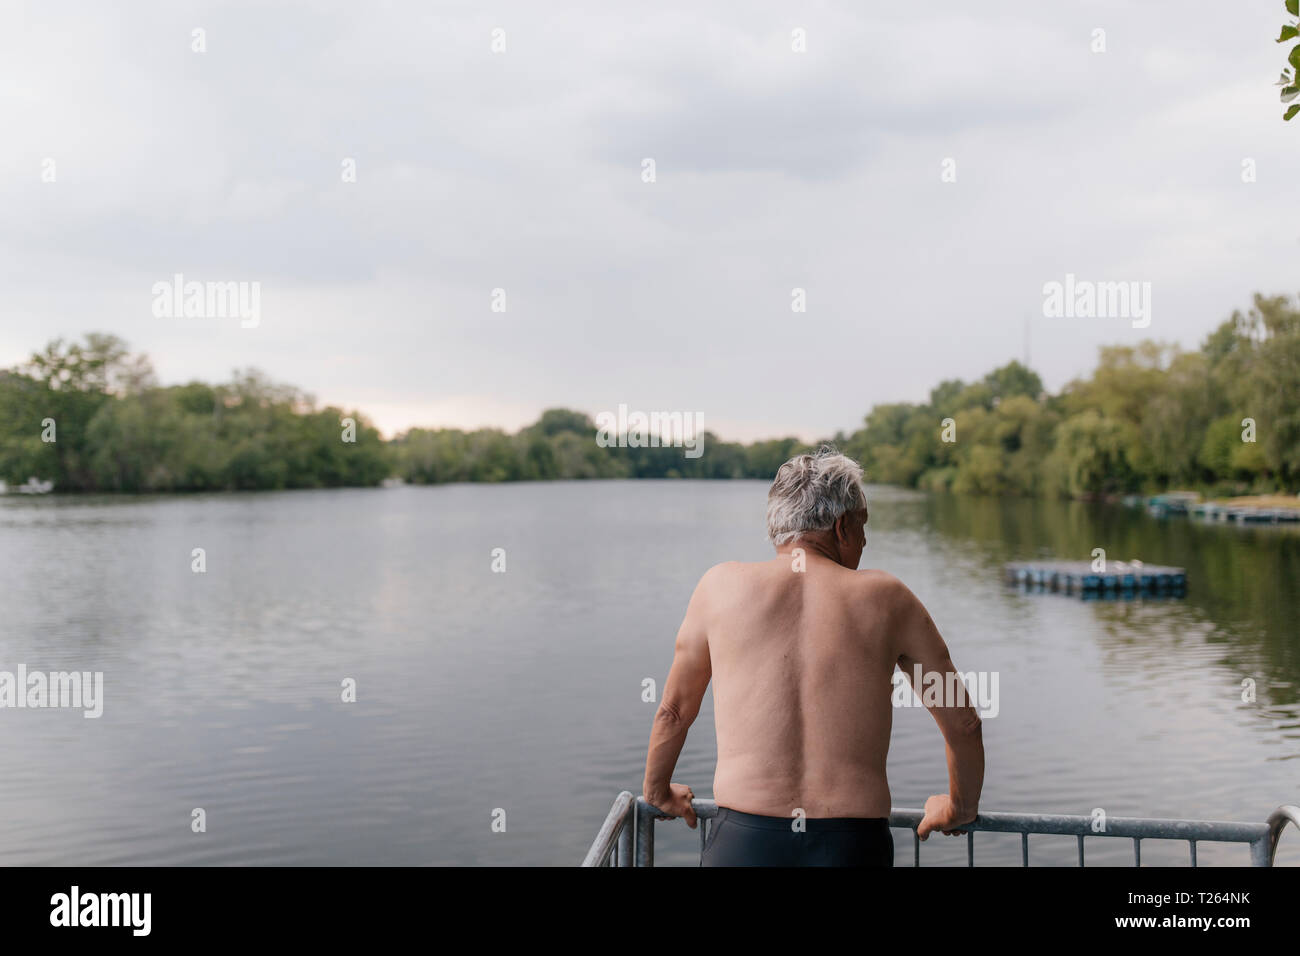 Man standing at a lake Banque D'Images